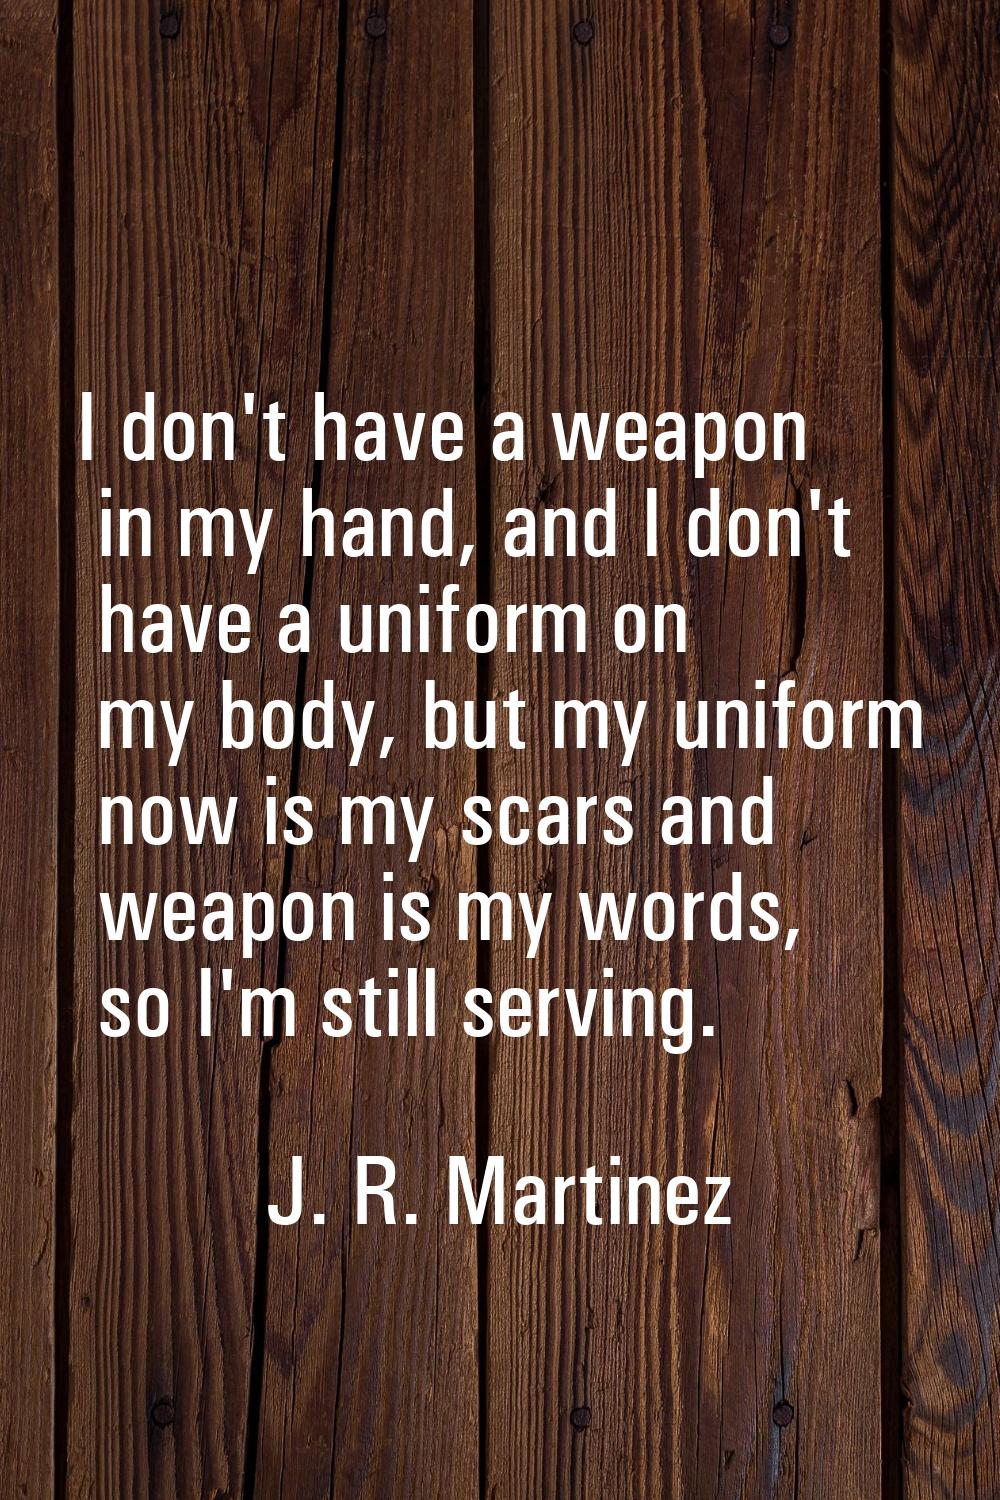 I don't have a weapon in my hand, and I don't have a uniform on my body, but my uniform now is my s